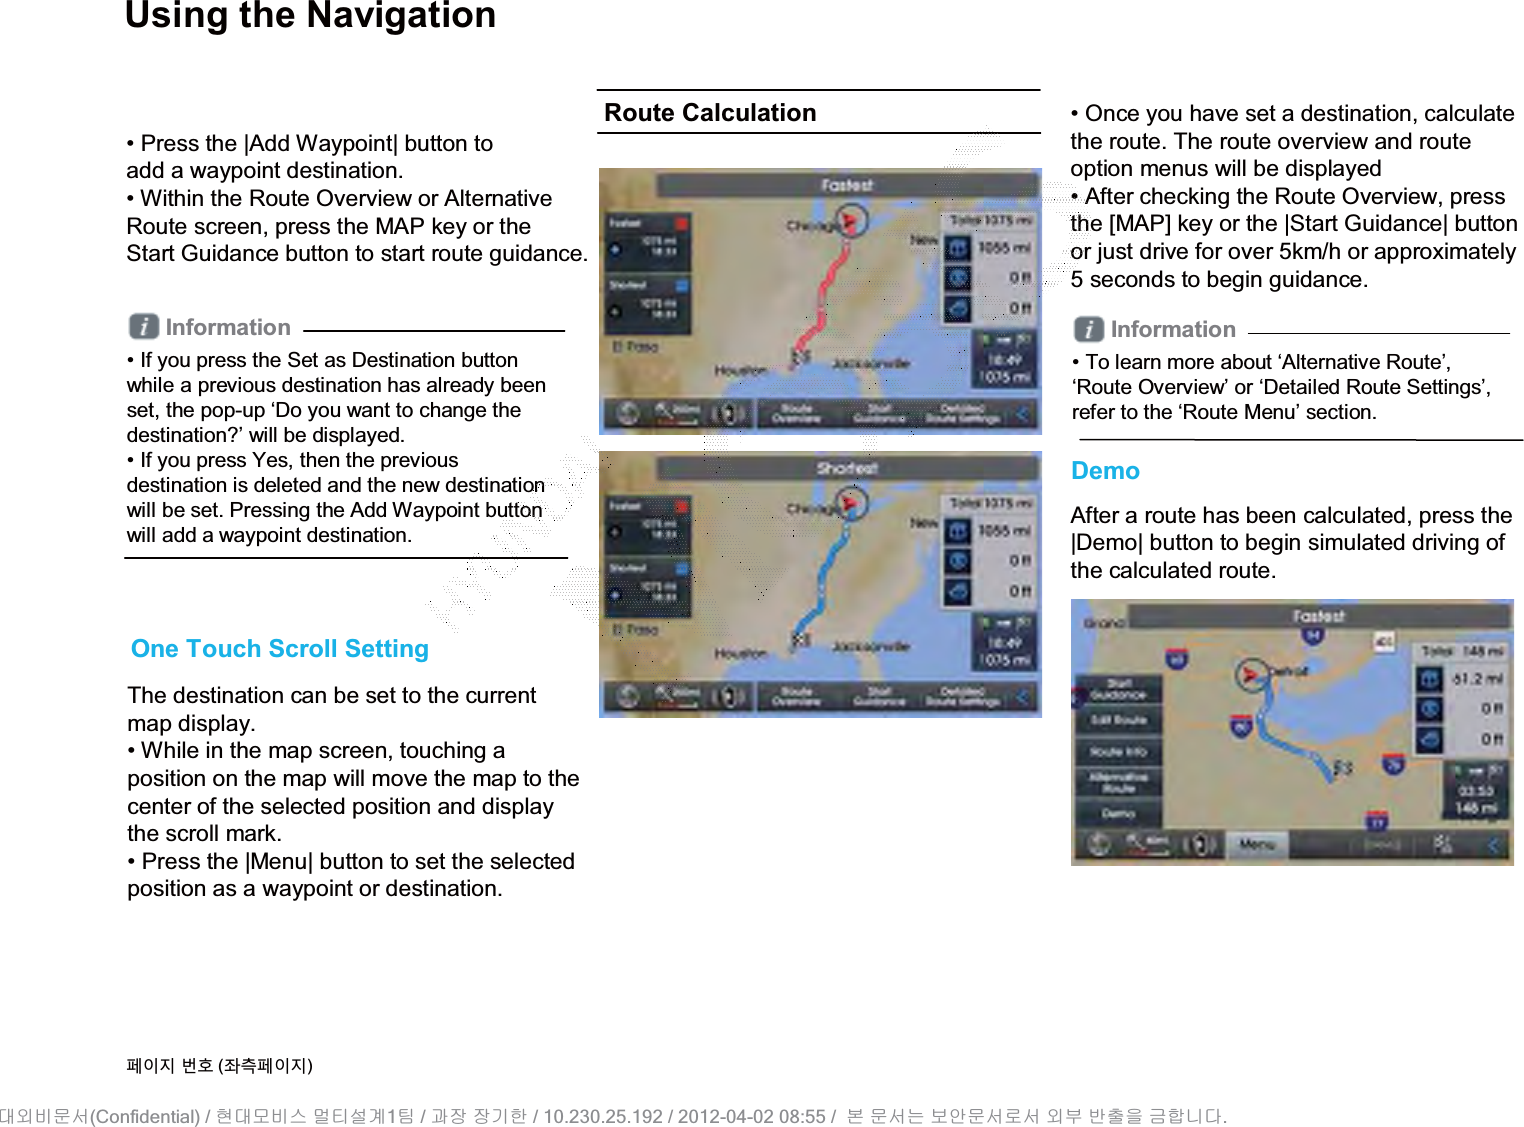 Using the NavigationThe destination can be set to the currentmap display.• While in the map screen, touching a position on the map will move the map to the center of the selected position and display the scroll mark. • Press the |Menu| button to set the selected position as a waypoint or destination.One Touch Scroll SettingInformation• If you press the Set as Destination button while a previous destination has already been set, the pop-up ‘Do you want to change the destination?’ will be displayed.• If you press Yes, then the previous destination is deleted and the new destination will be set. Pressing the Add Waypoint button will add a waypoint destination.• Press the |Add Waypoint| button toadd a waypoint destination.• Within the Route Overview or Alternative Route screen, press the MAP key or the Start Guidance button to start route guidance.• Once you have set a destination, calculatethe route. The route overview and route option menus will be displayed• After checking the Route Overview, pressthe [MAP] key or the |Start Guidance| button or just drive for over 5km/h or approximately 5 seconds to begin guidance.DemoAfter a route has been calculated, press the |Demo| button to begin simulated driving of the calculated route.Route CalculationInformation• To learn more about ‘Alternative Route’, ‘Route Overview’ or ‘Detailed Route Settings’, refer to the ‘Route Menu’ section.૓ࢇए ء୎ (্ࣛ૓ࢇए)(Confidential) /    1  /     / 10.230.25.192 / 2012-04-02 08:55 /             .␴㞬⽸ⱬ㉐ 䜸␴⯜⽸㏘ ⭴䐤㉘᷸ 䐴 Ḱ㣙 㣙ὤ䚐 ⸬ ⱬ㉐⏈ ⸨㙼ⱬ㉐⦐㉐ 㞬⺴ ⵌ㻐㡸 Ἴ䚝⏼␘